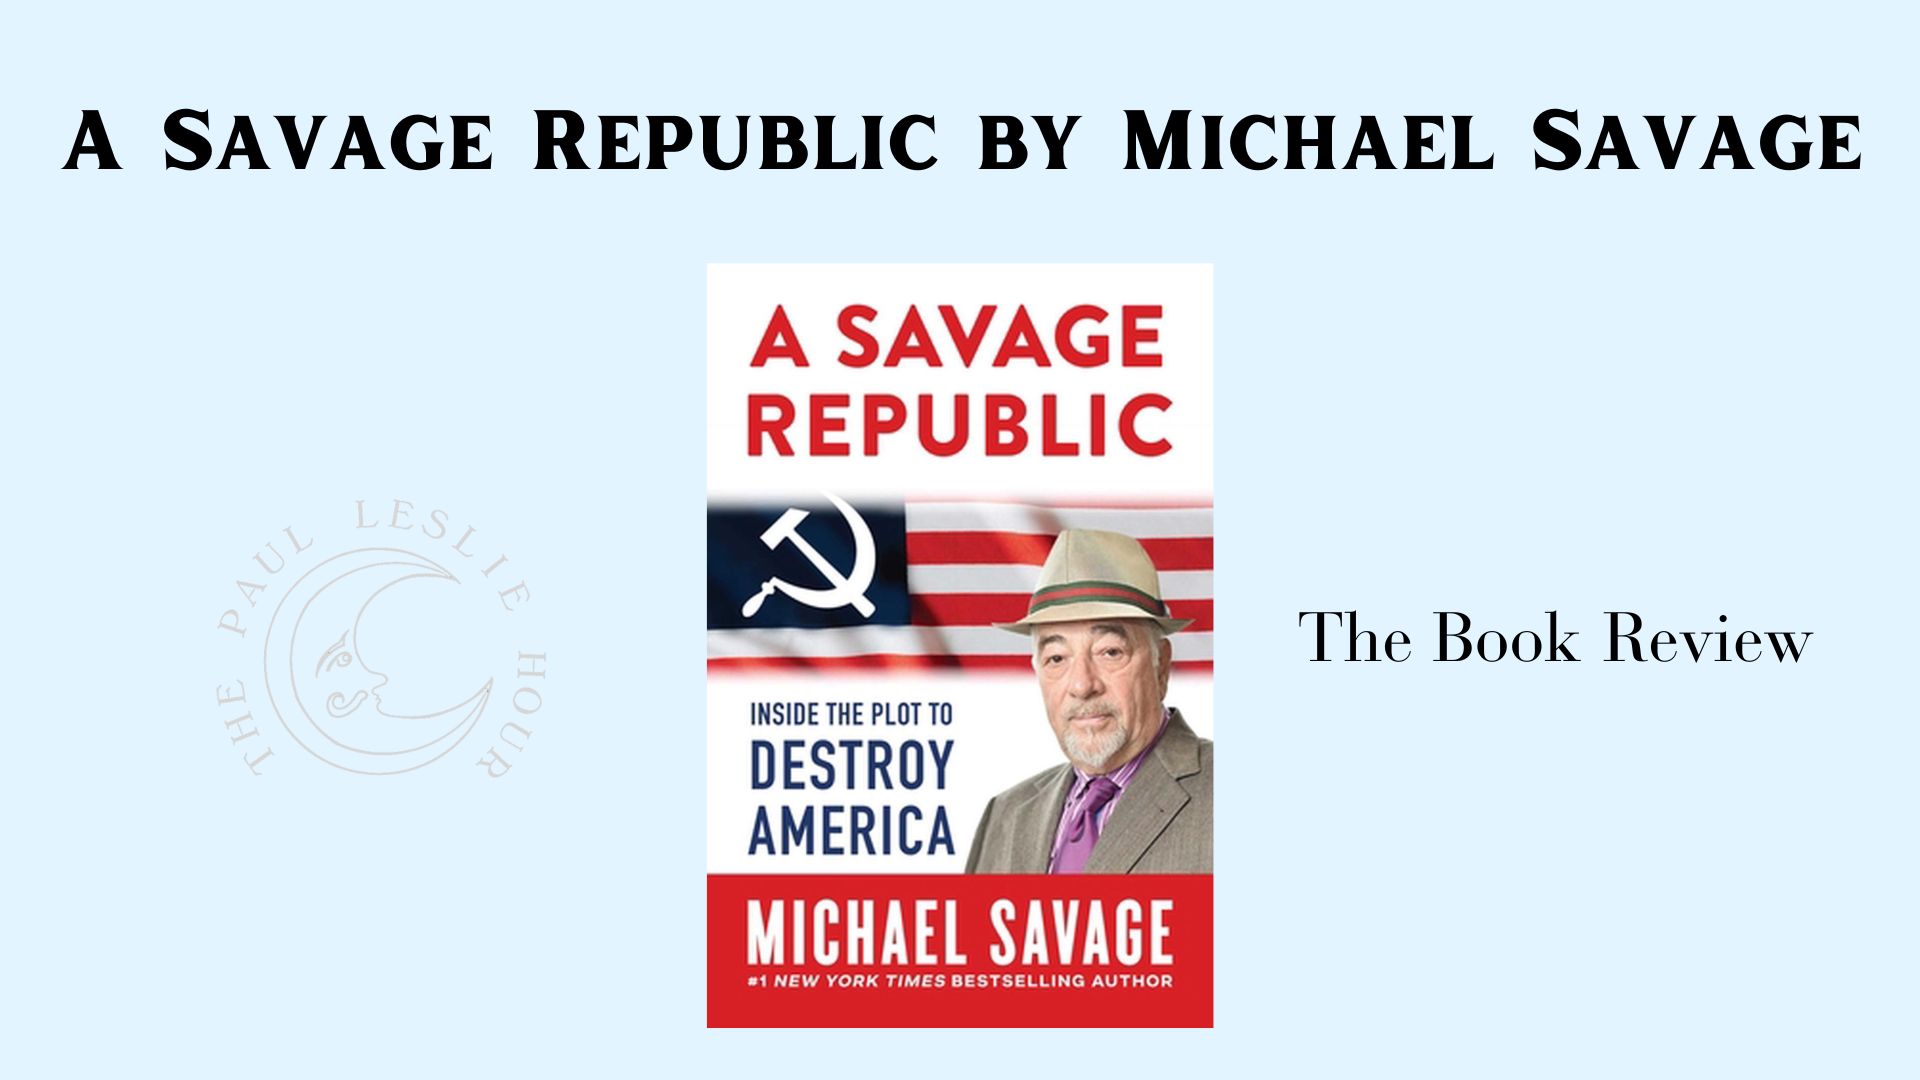 The book A Savage Republic by Michael Savage is shown on a light blue background.